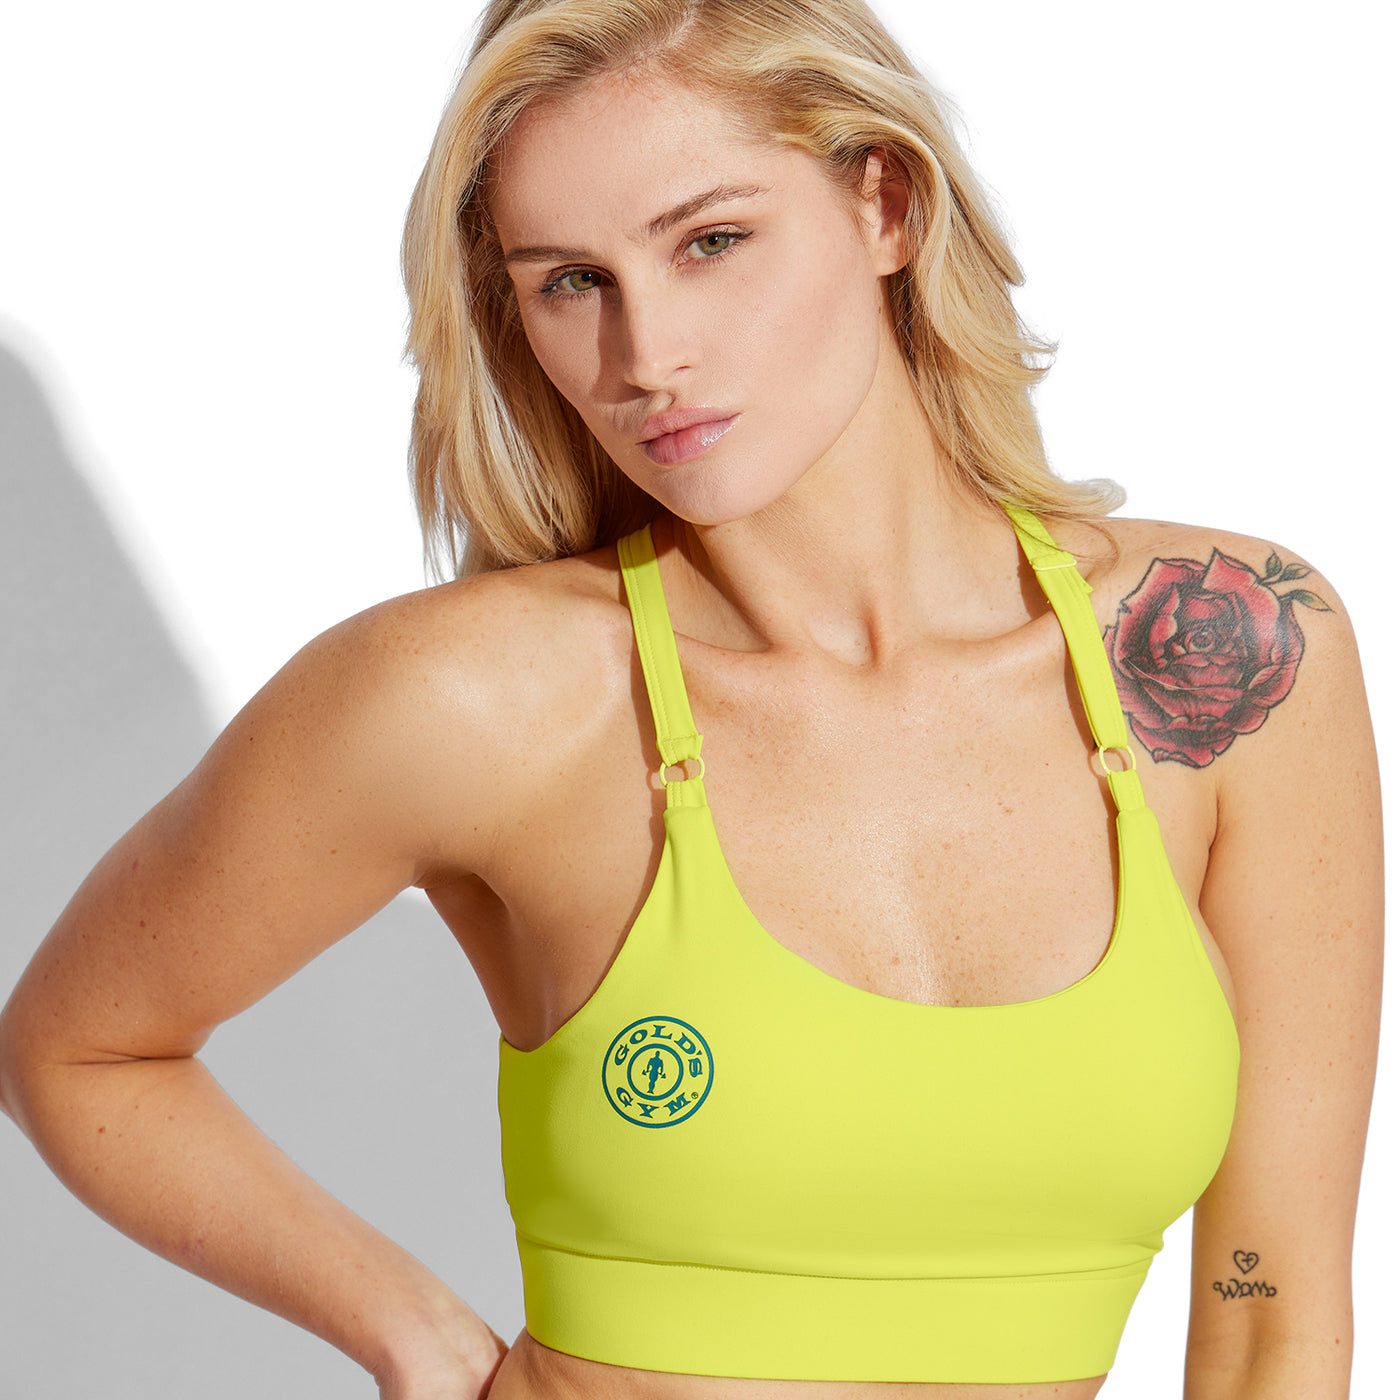 photo of female model wearing train bra in yellow golds gym weight plate logo in blue on right side.